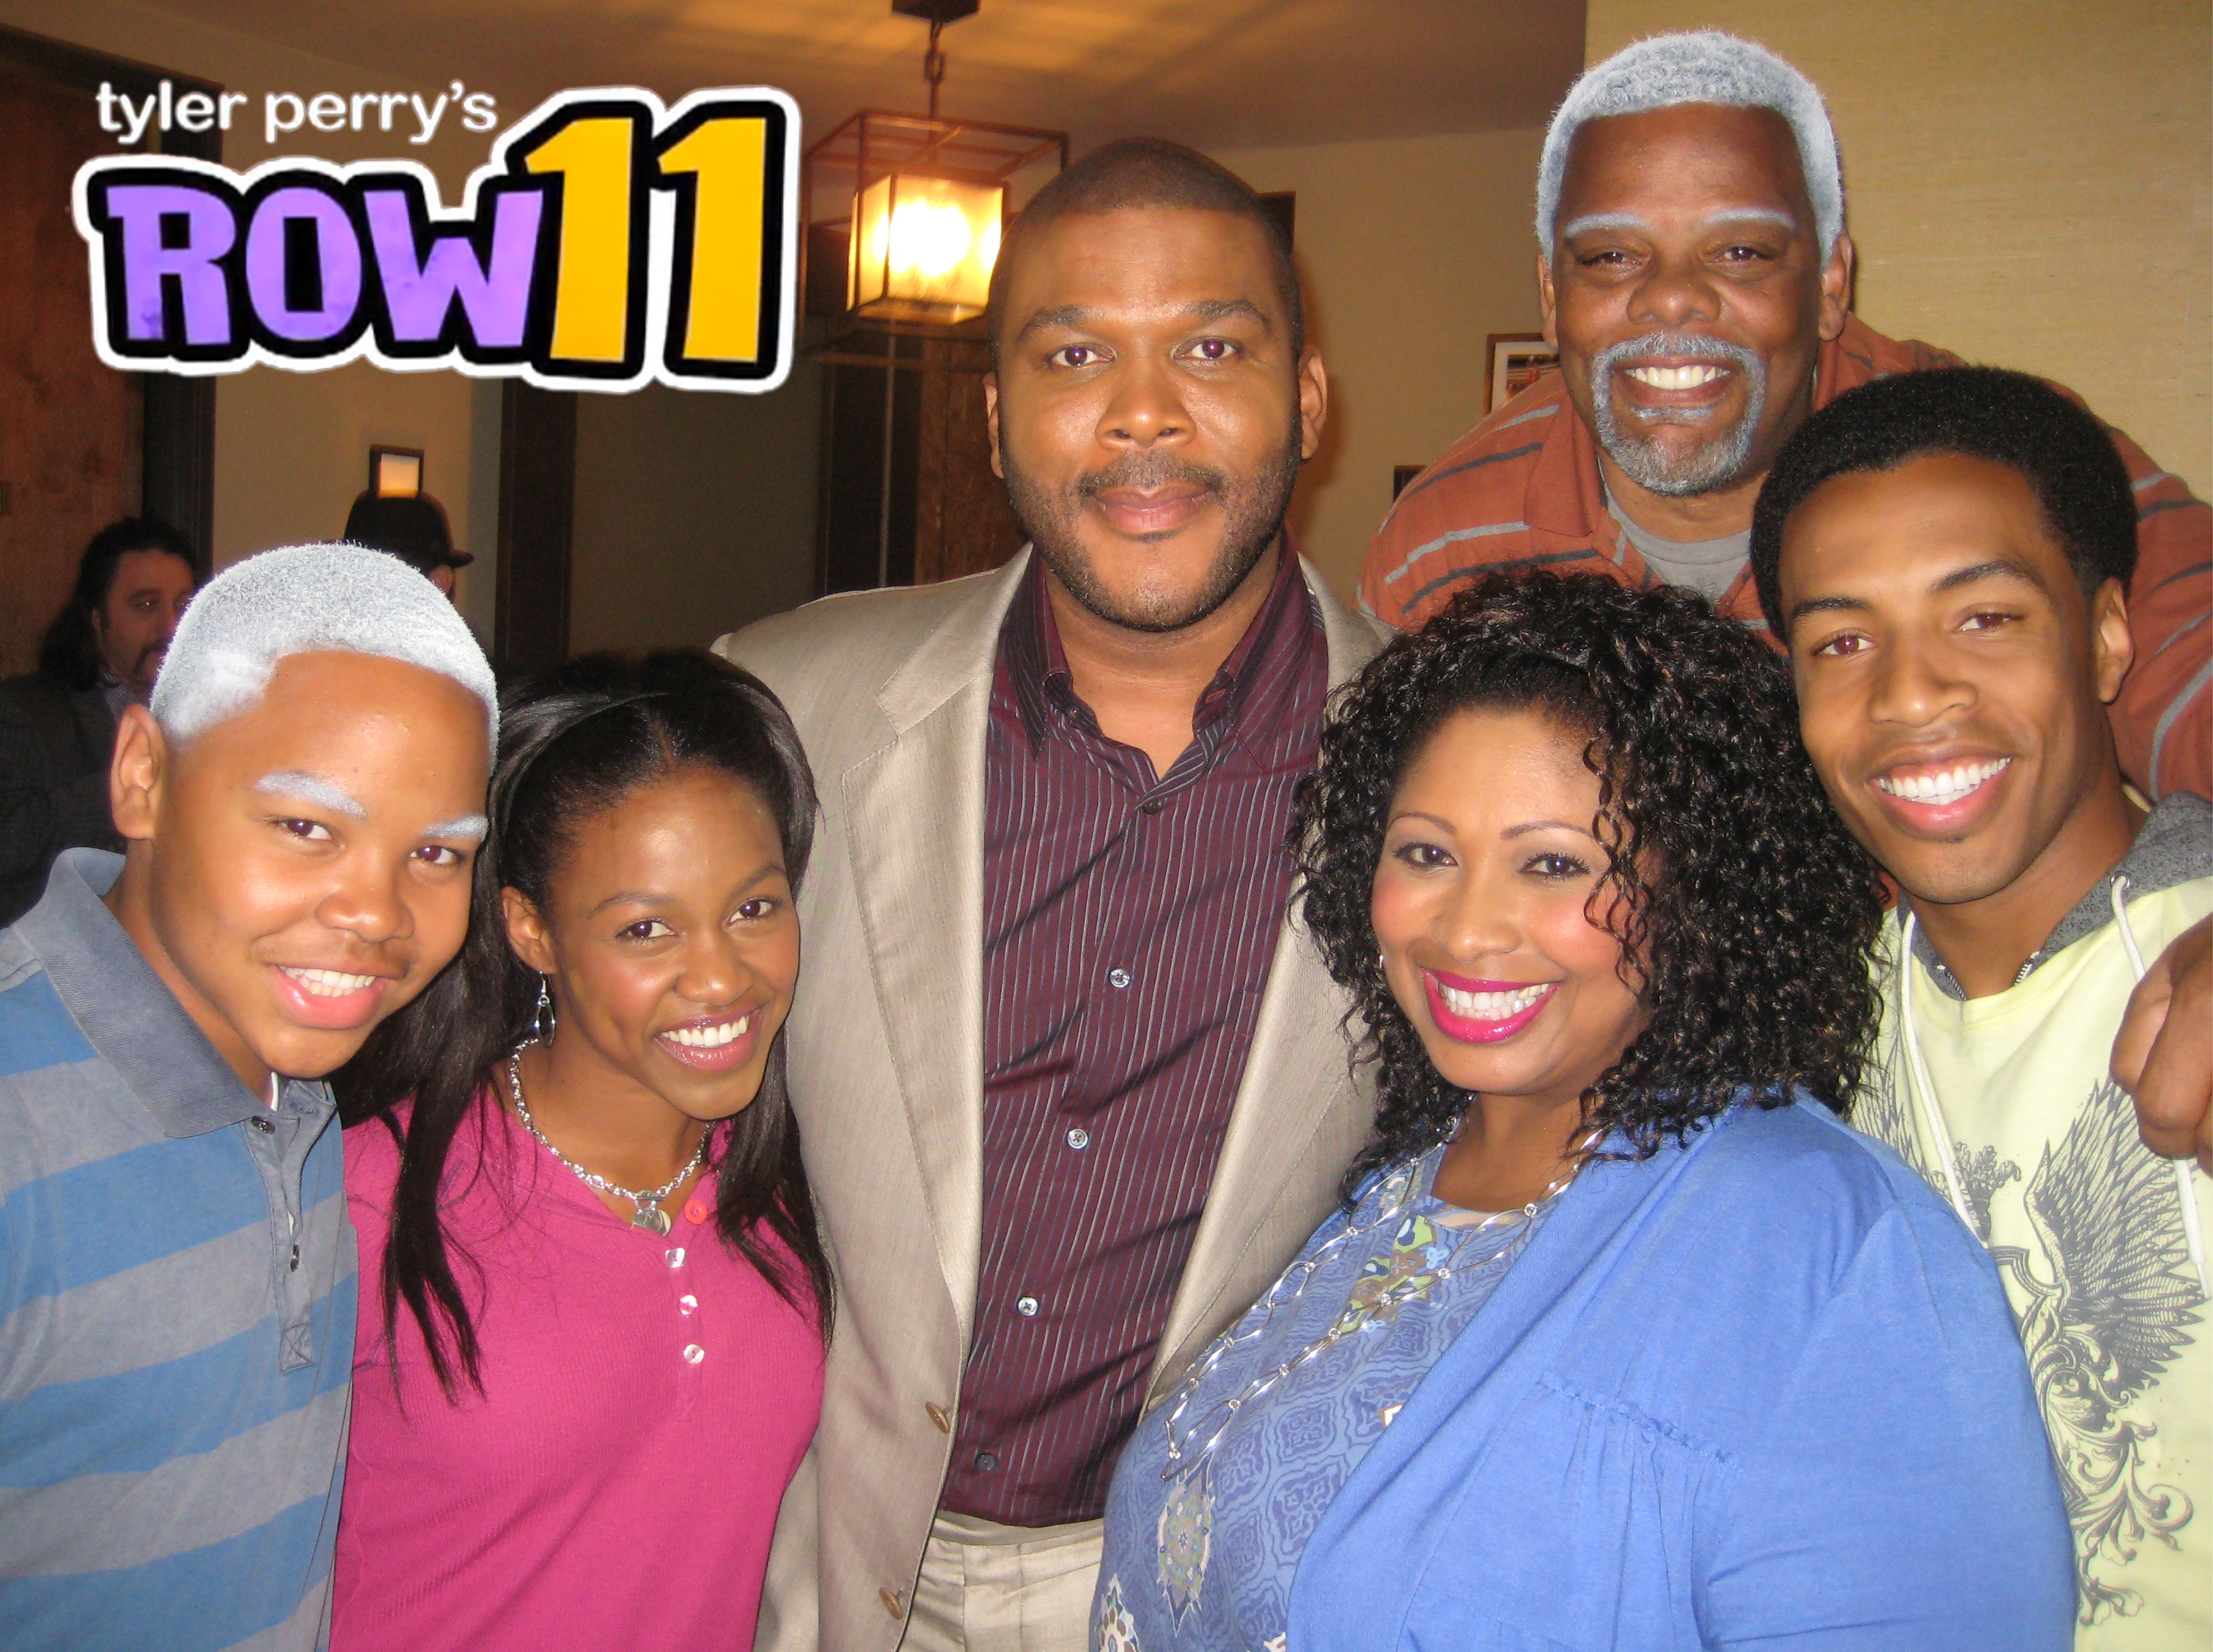 Tyler Perry's Row 11 ...on the Conan Show